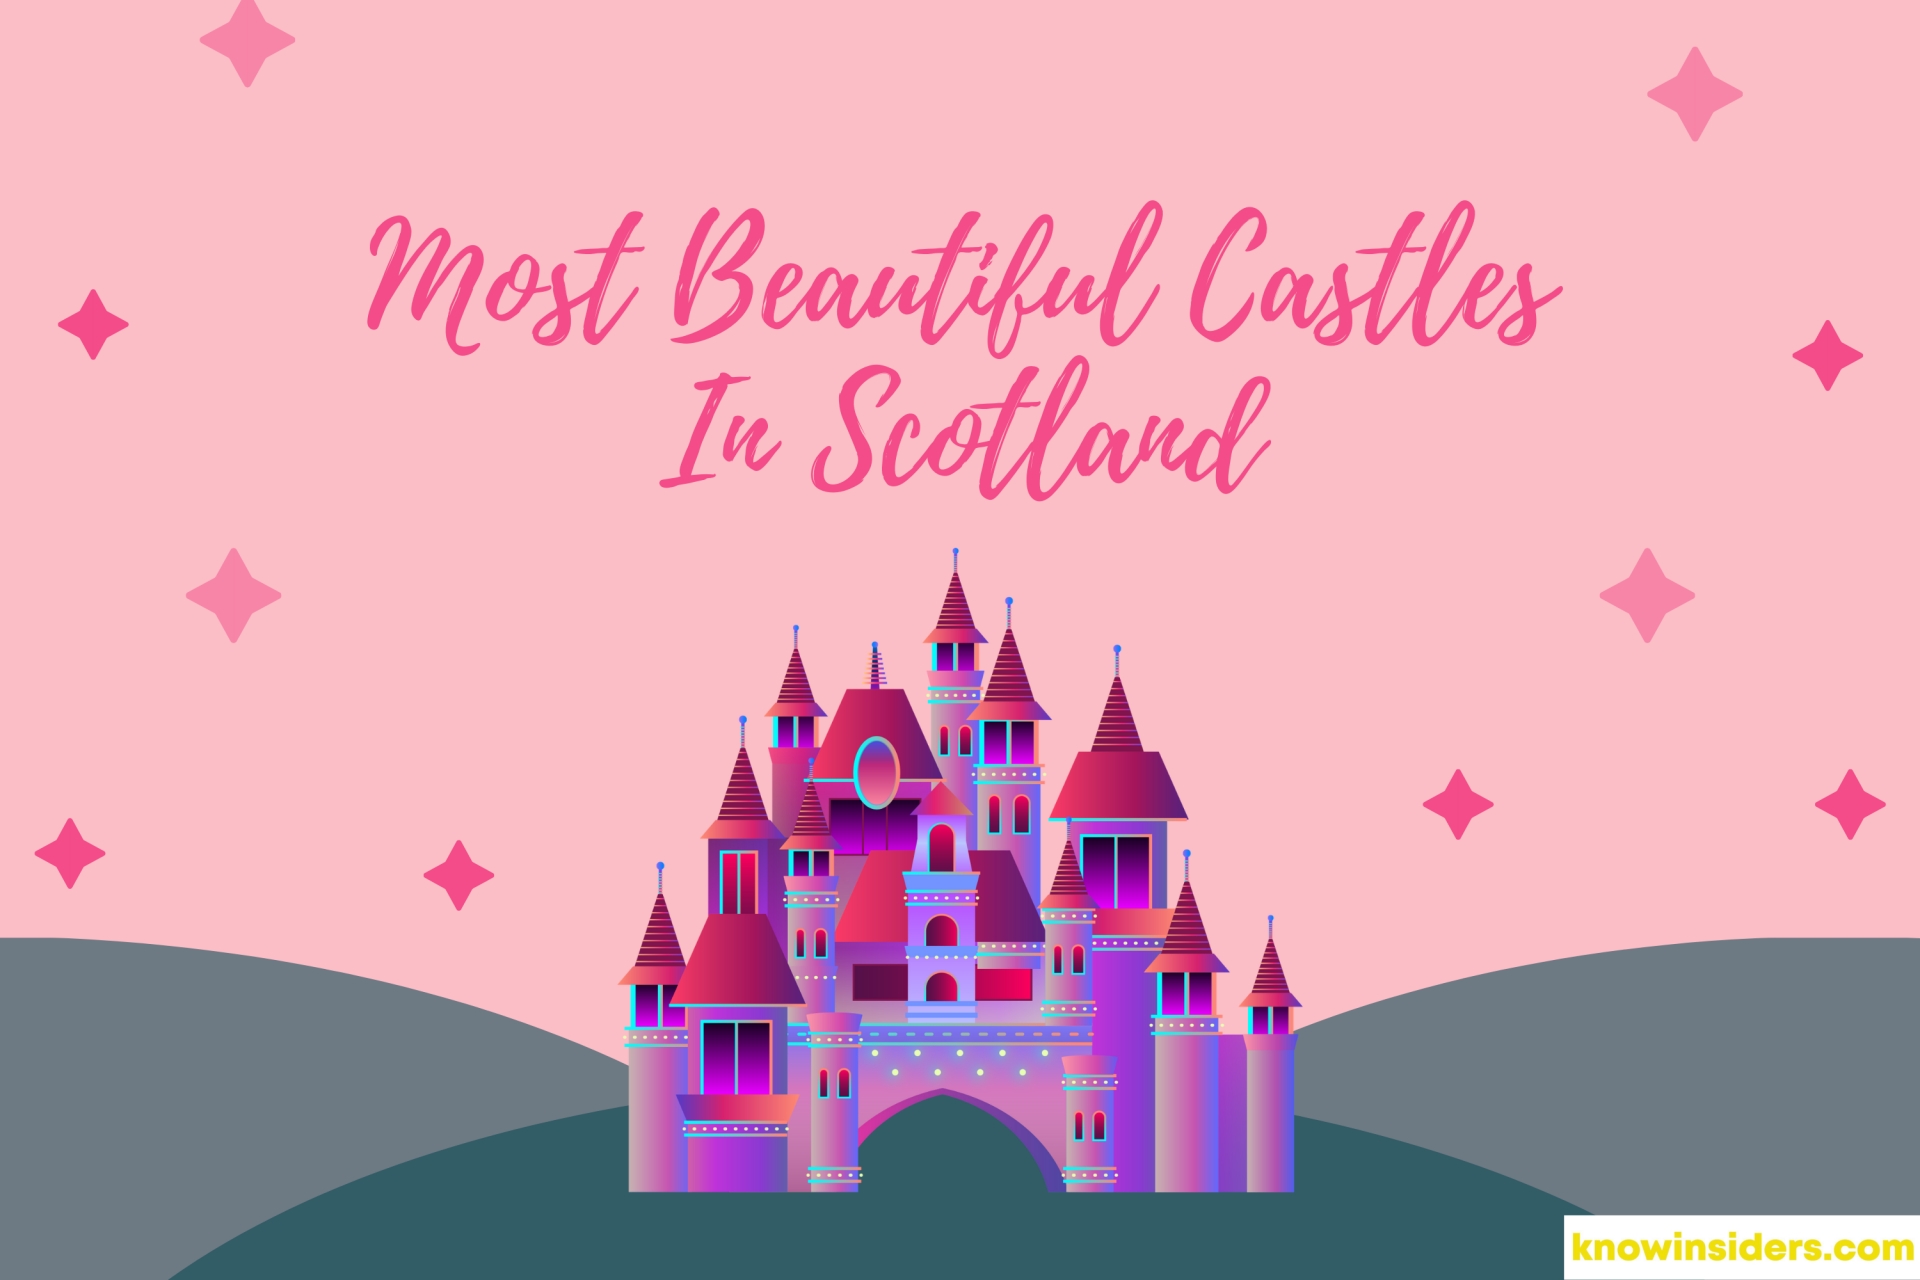 Top 10 Most Beautiful Castles In Scotland